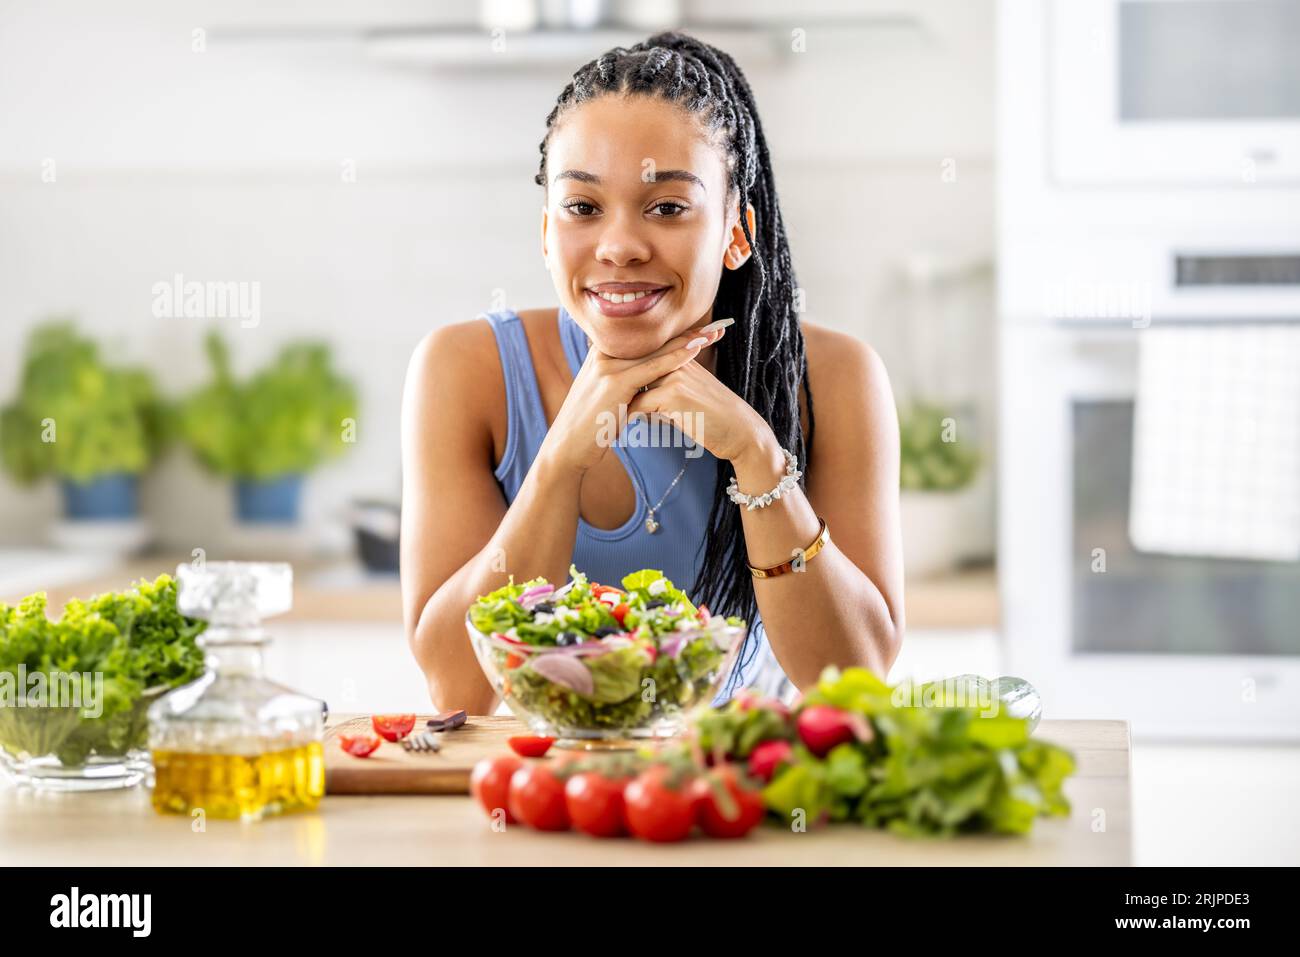 A good looking afro american girl prepared a healthy mixed salad of fresh vegetables. Stock Photo